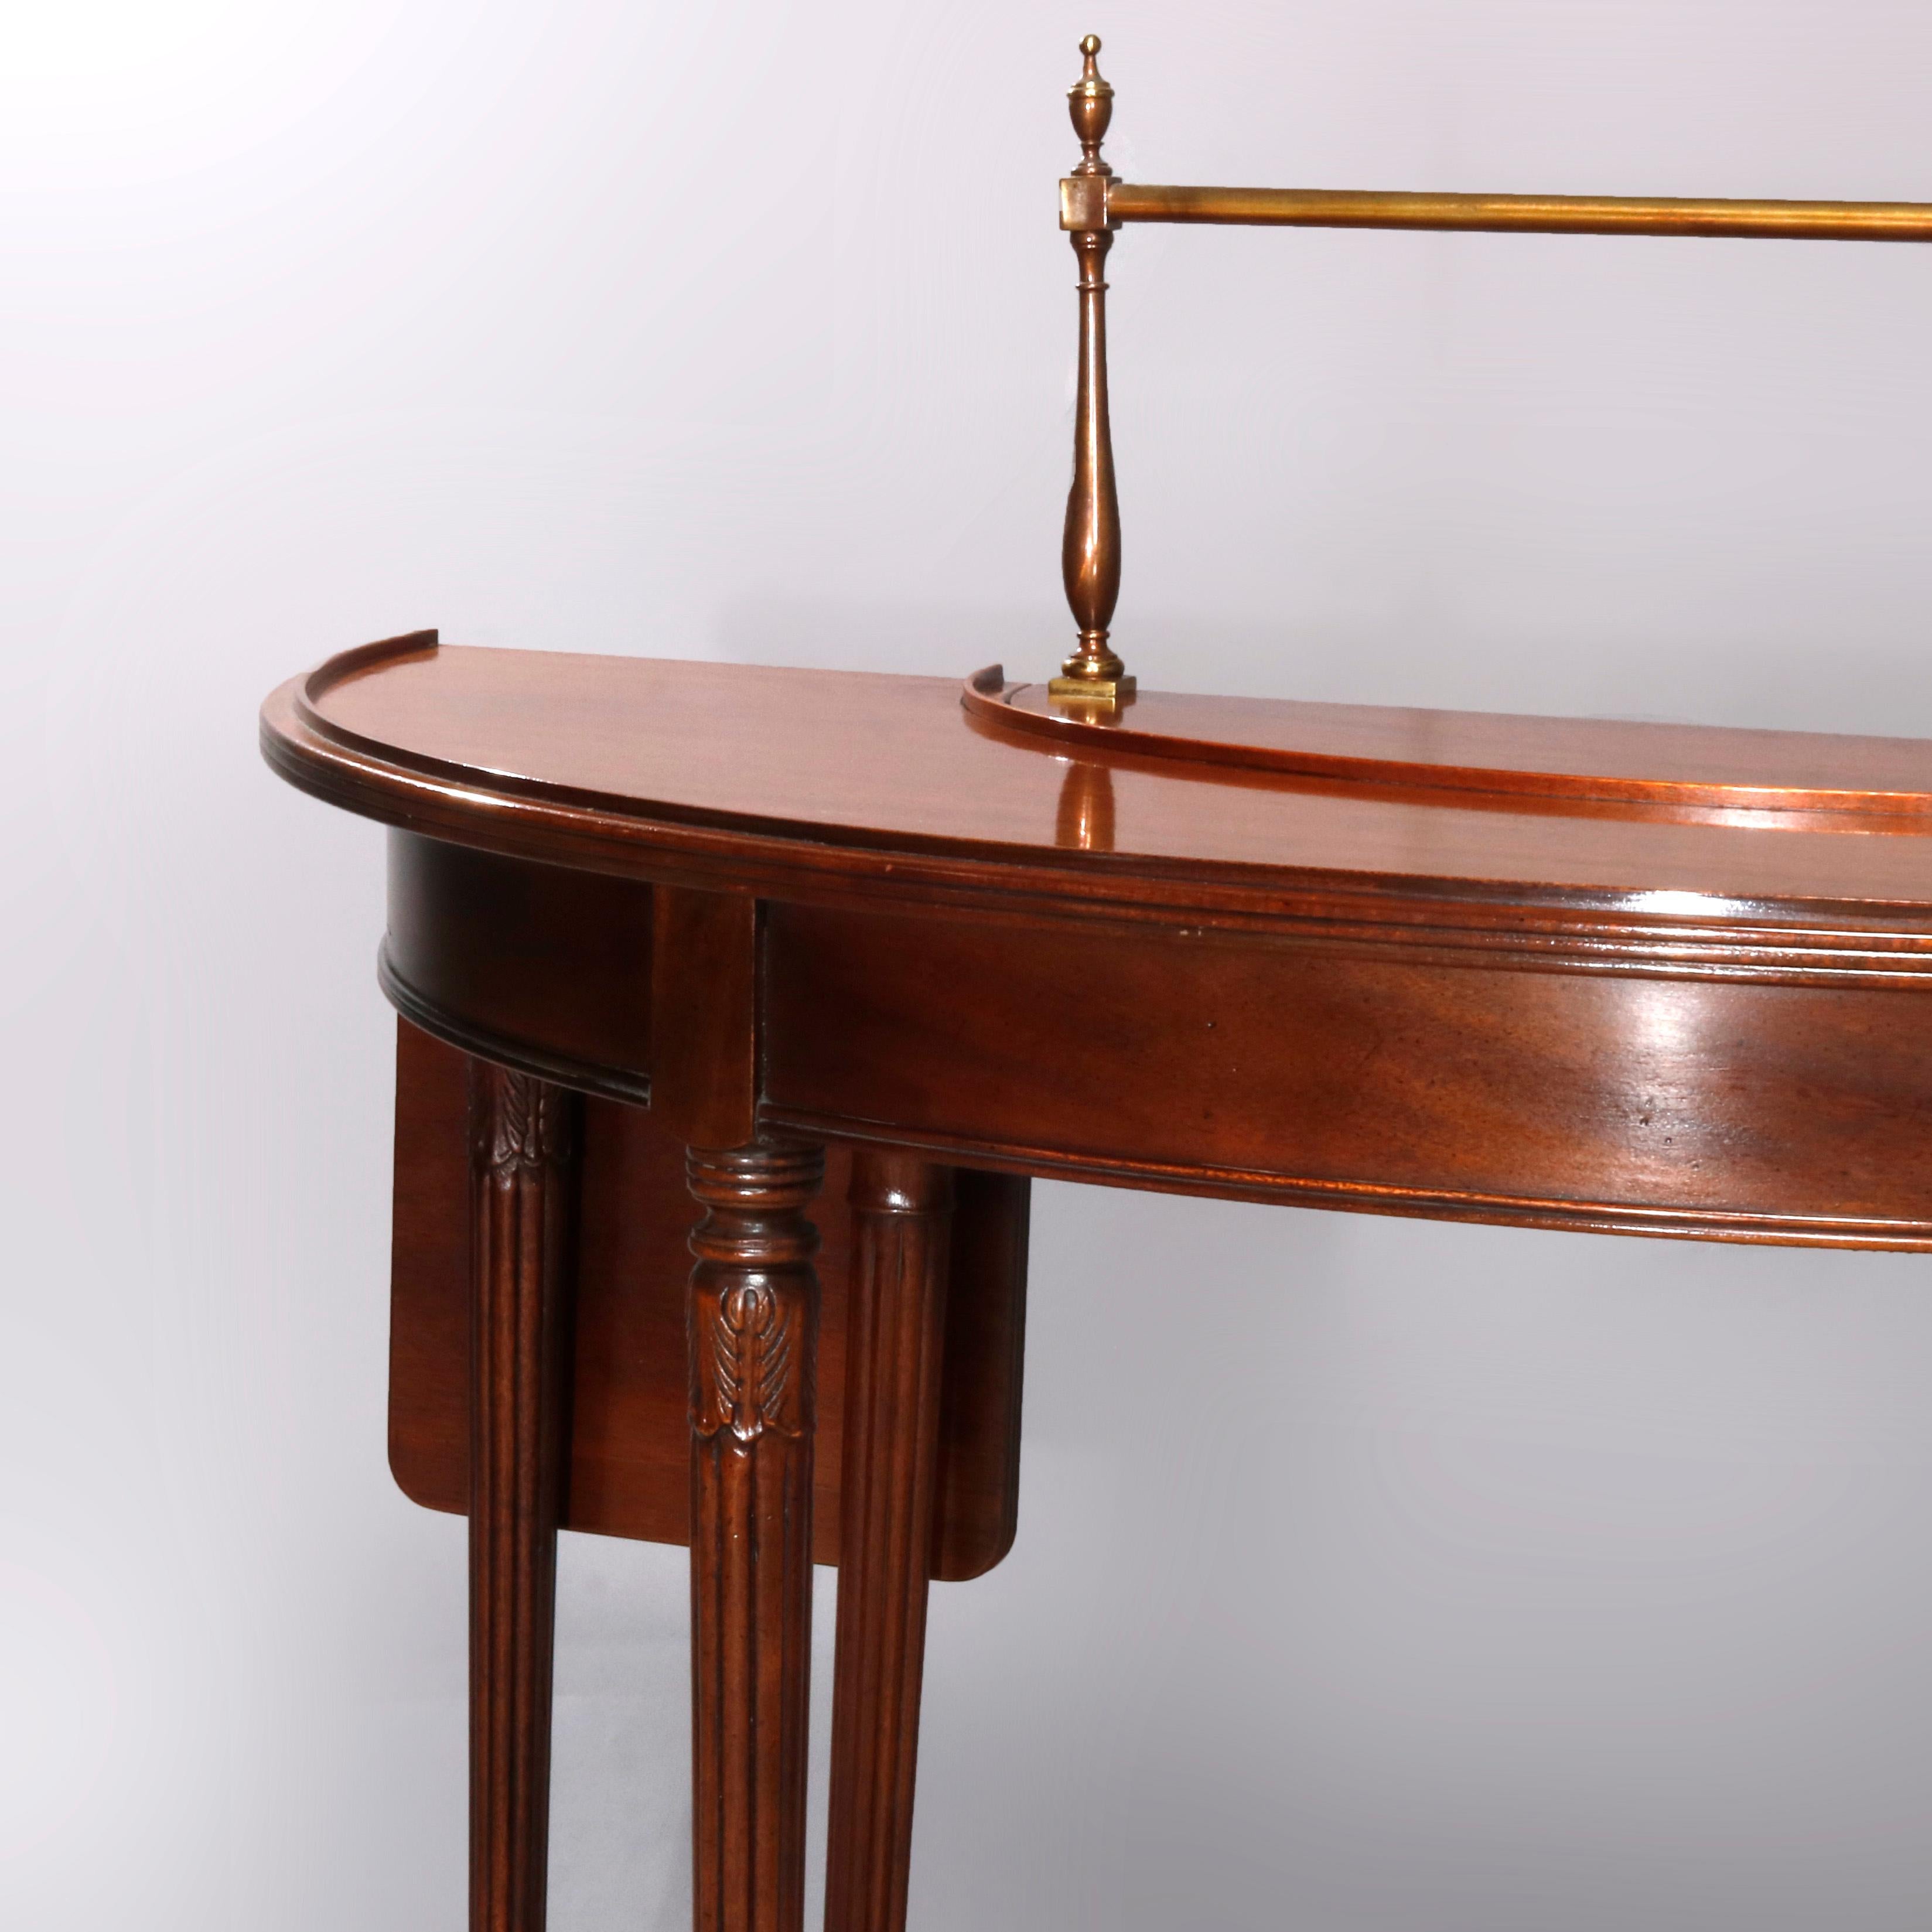 20th Century Vintage Demilune Wallace Nutting Collection Serving Table by Drexel, circa 1940